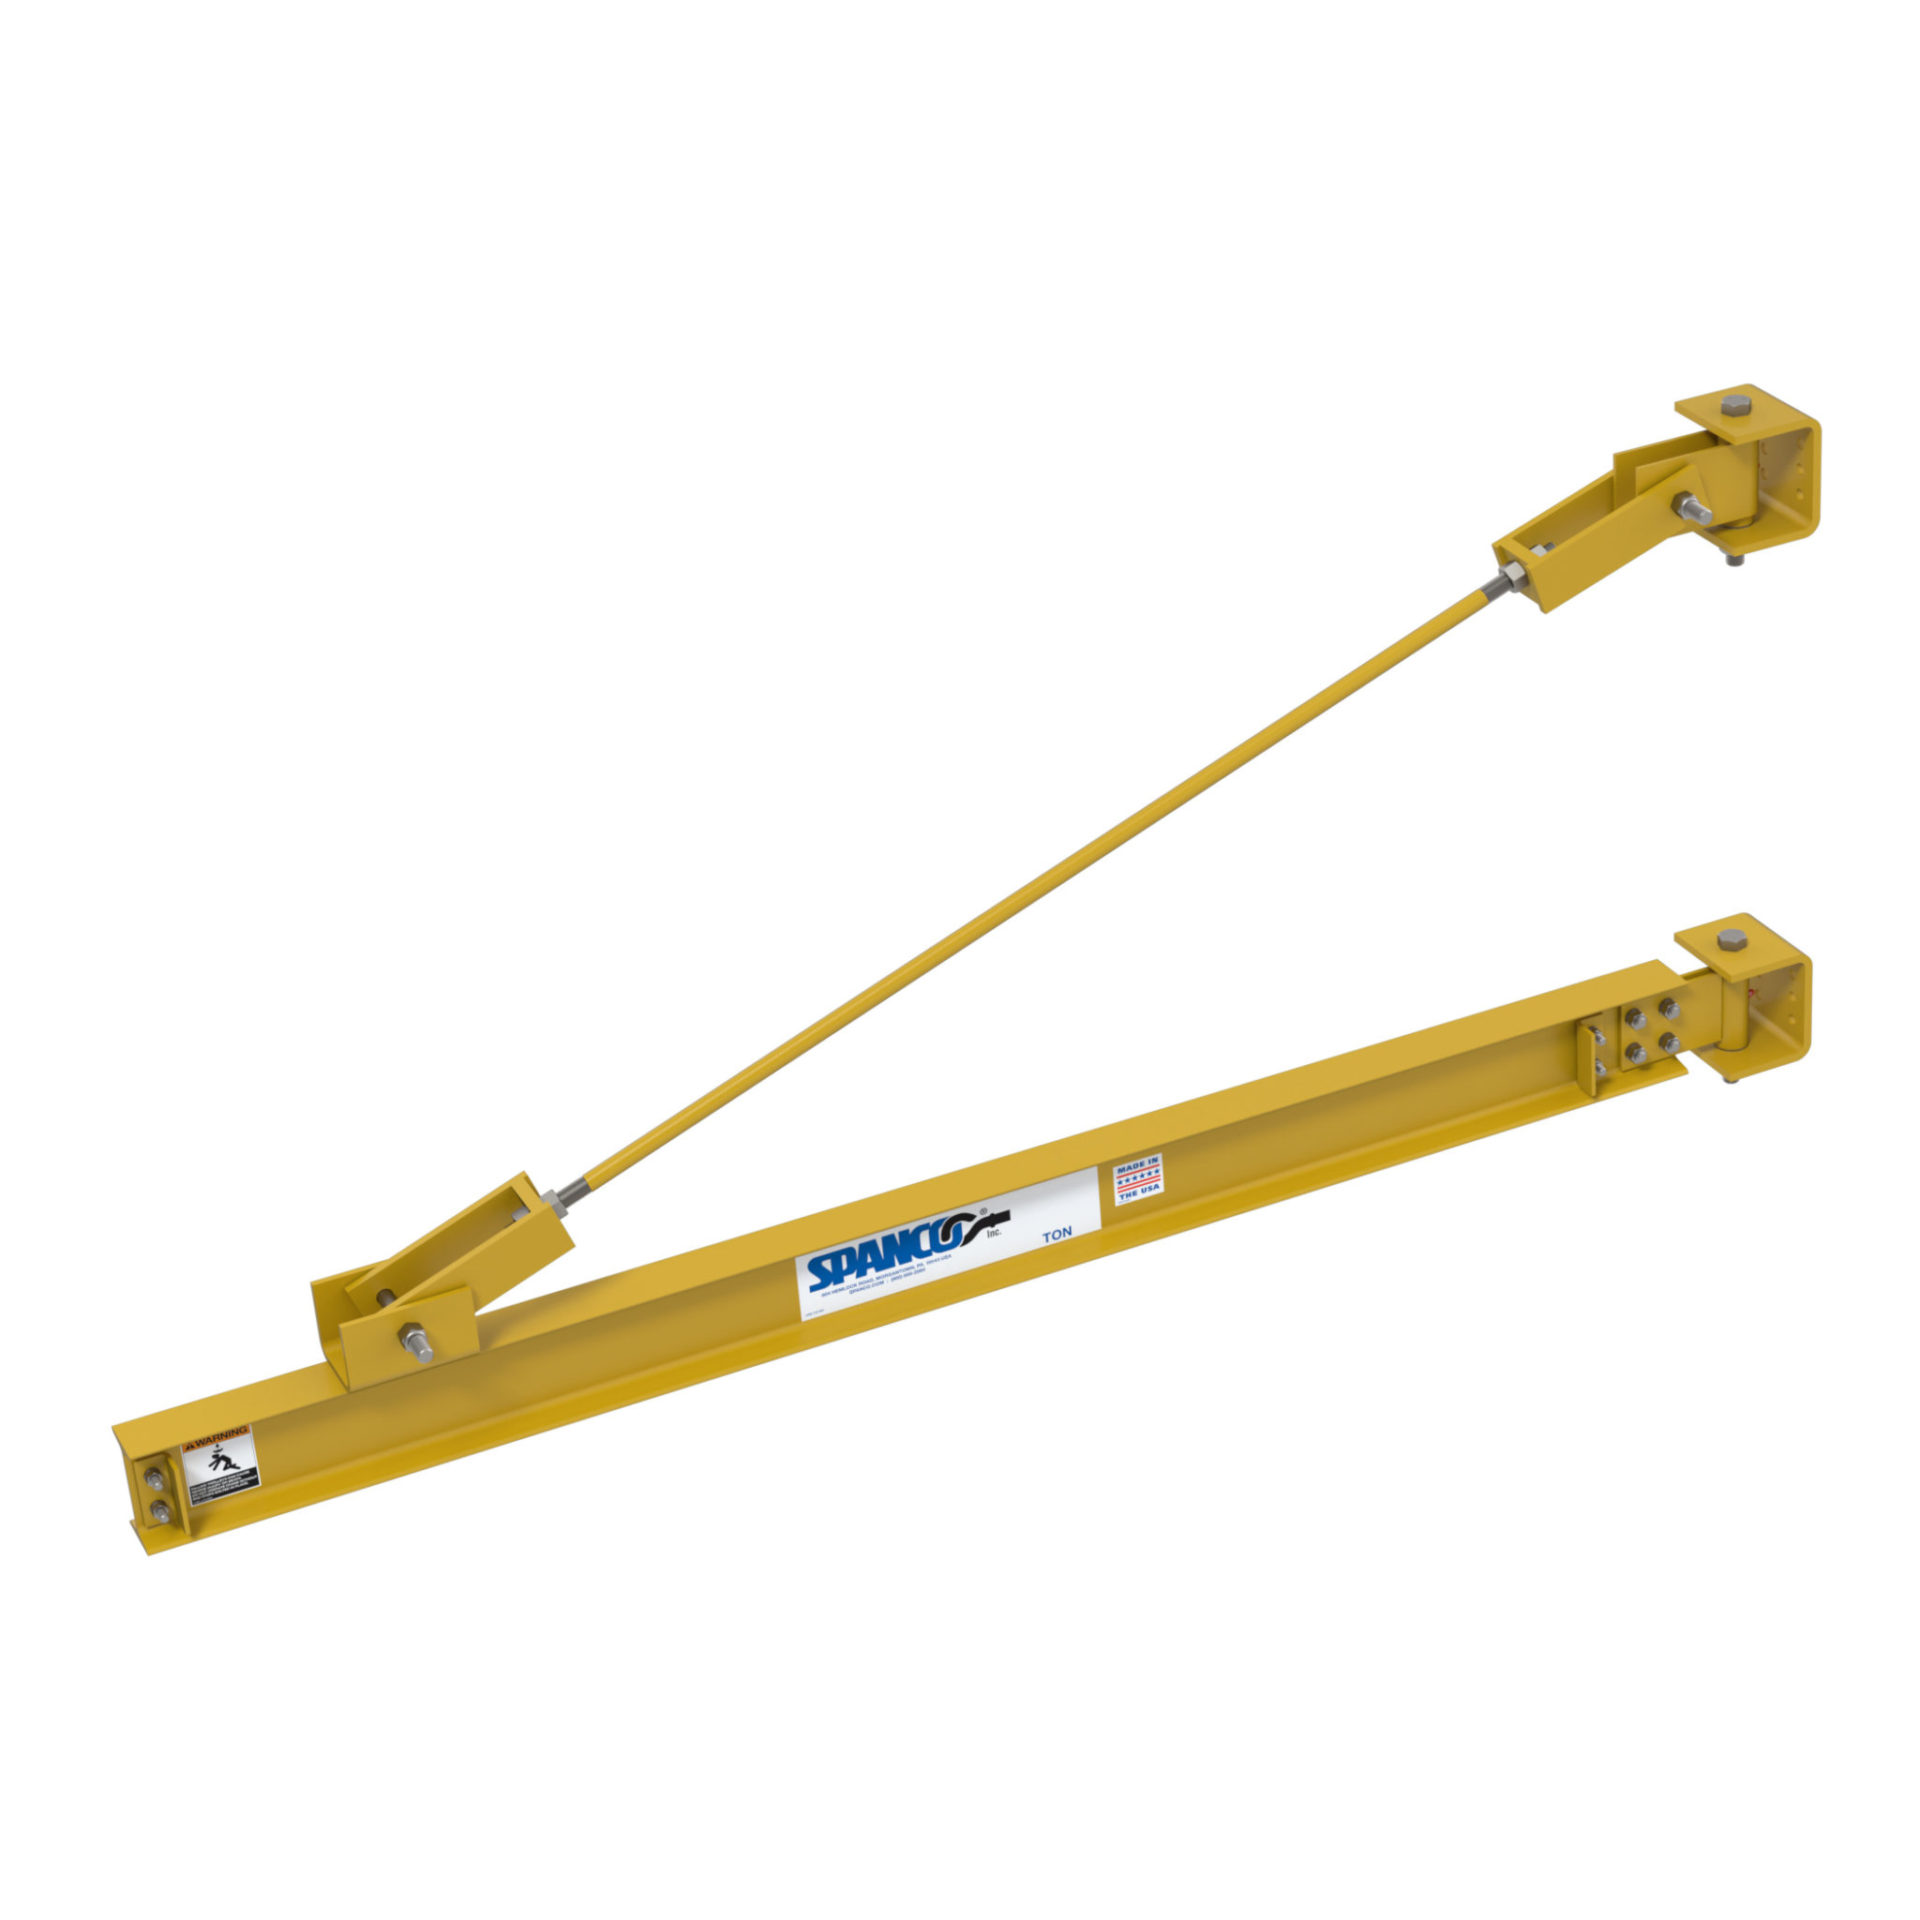 Wall-Mounted Jib Cranes— Tie-Rod Supported - 301 Series - Explore Our  Products - Materials Handling Solutions